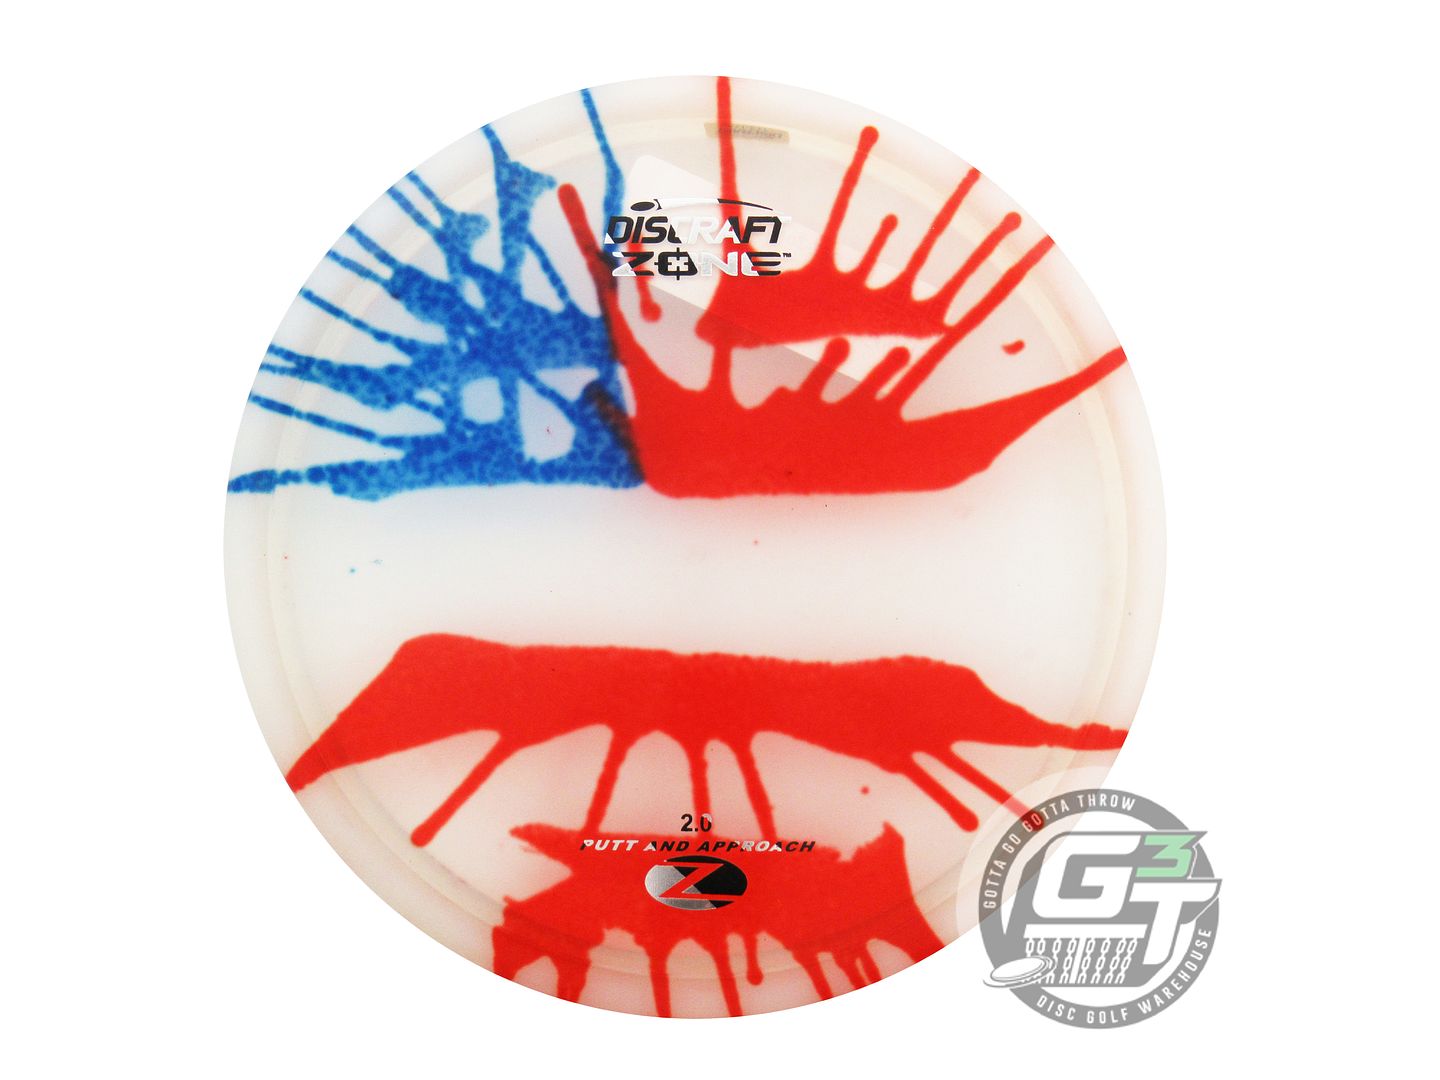 Discraft Fly Dye Elite Z Zone Putter Golf Disc (Individually Listed)